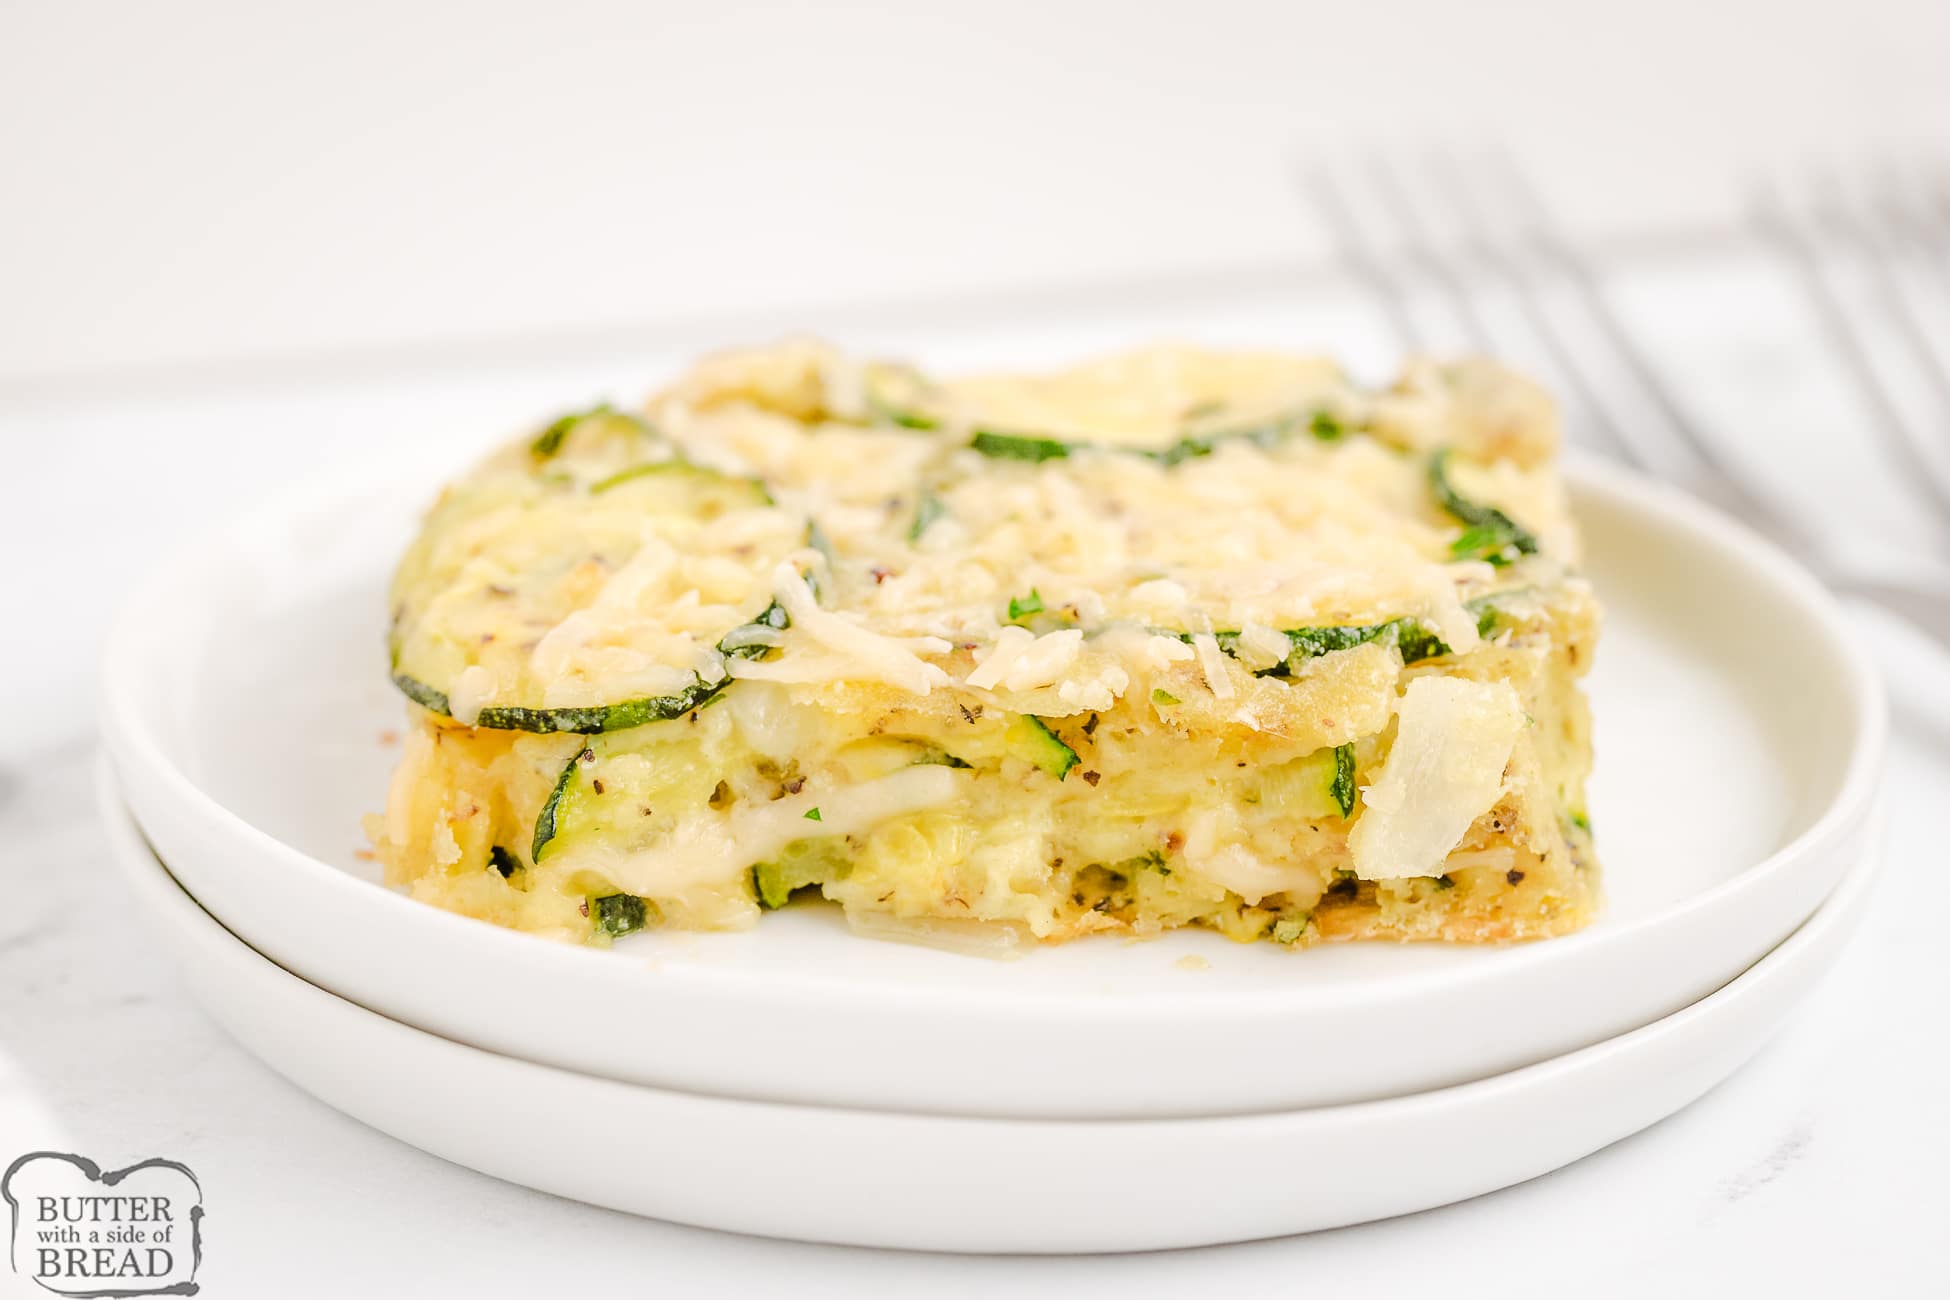 piece of baked zucchini casserole with Parmesan cheese